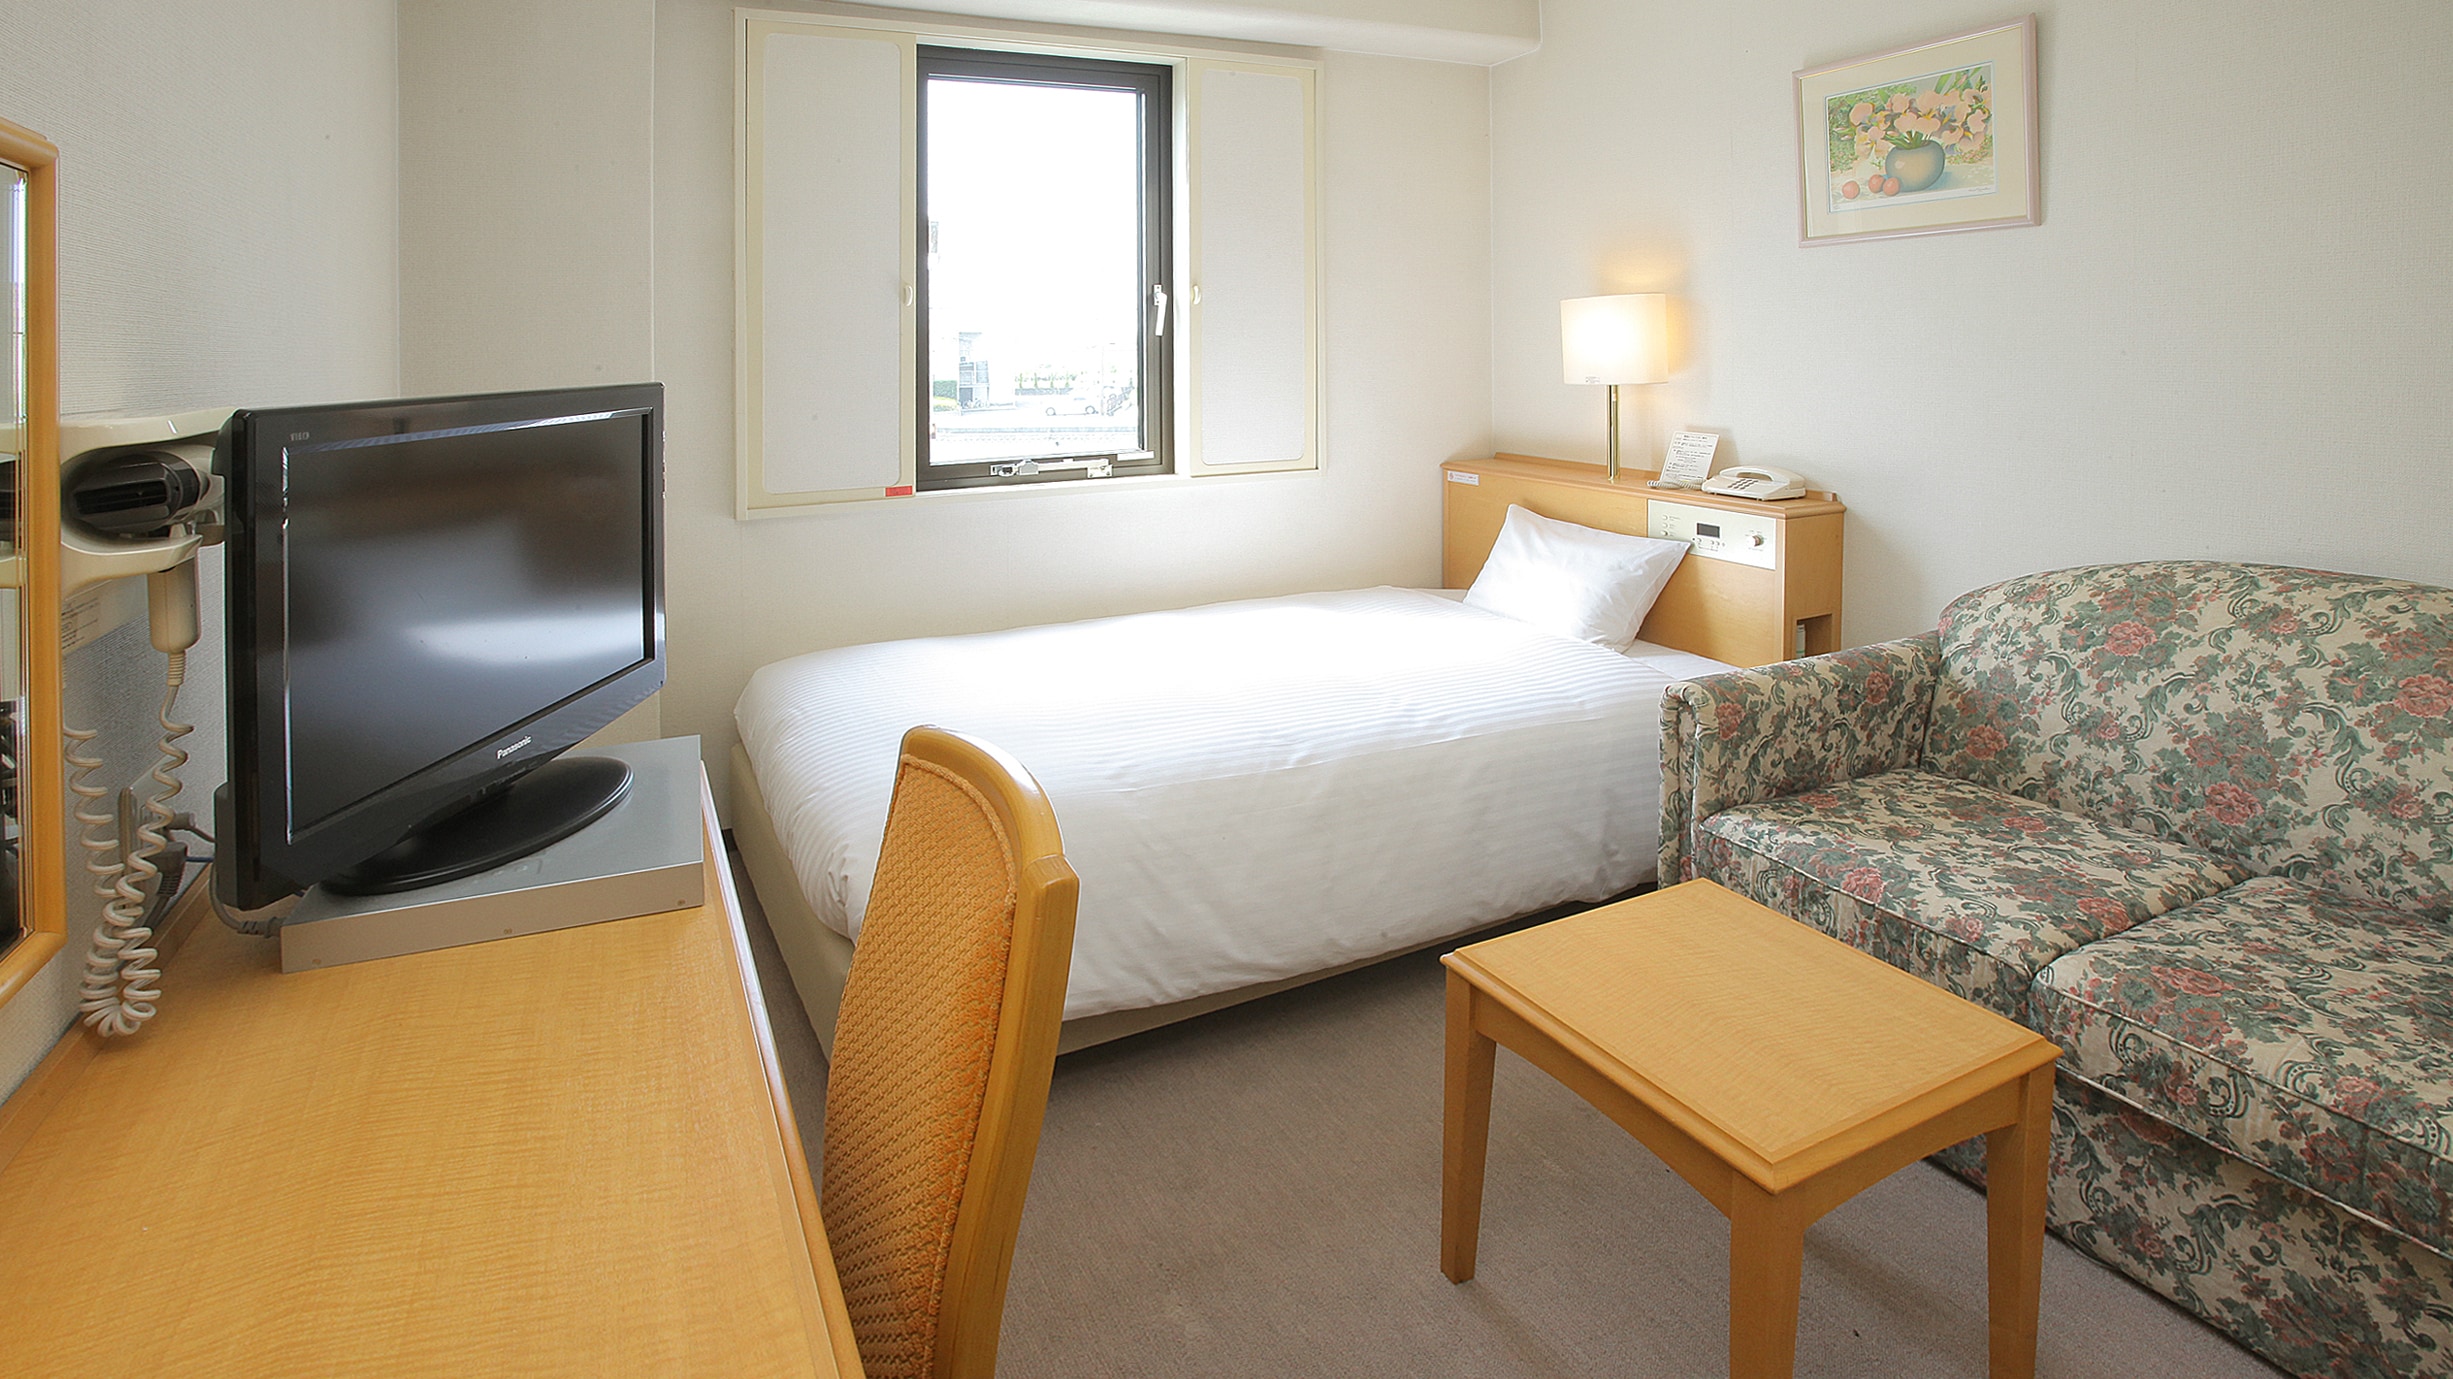 Deluxe single room ◇ Area 14.5㎡ ◇ All rooms are duvet style ◇